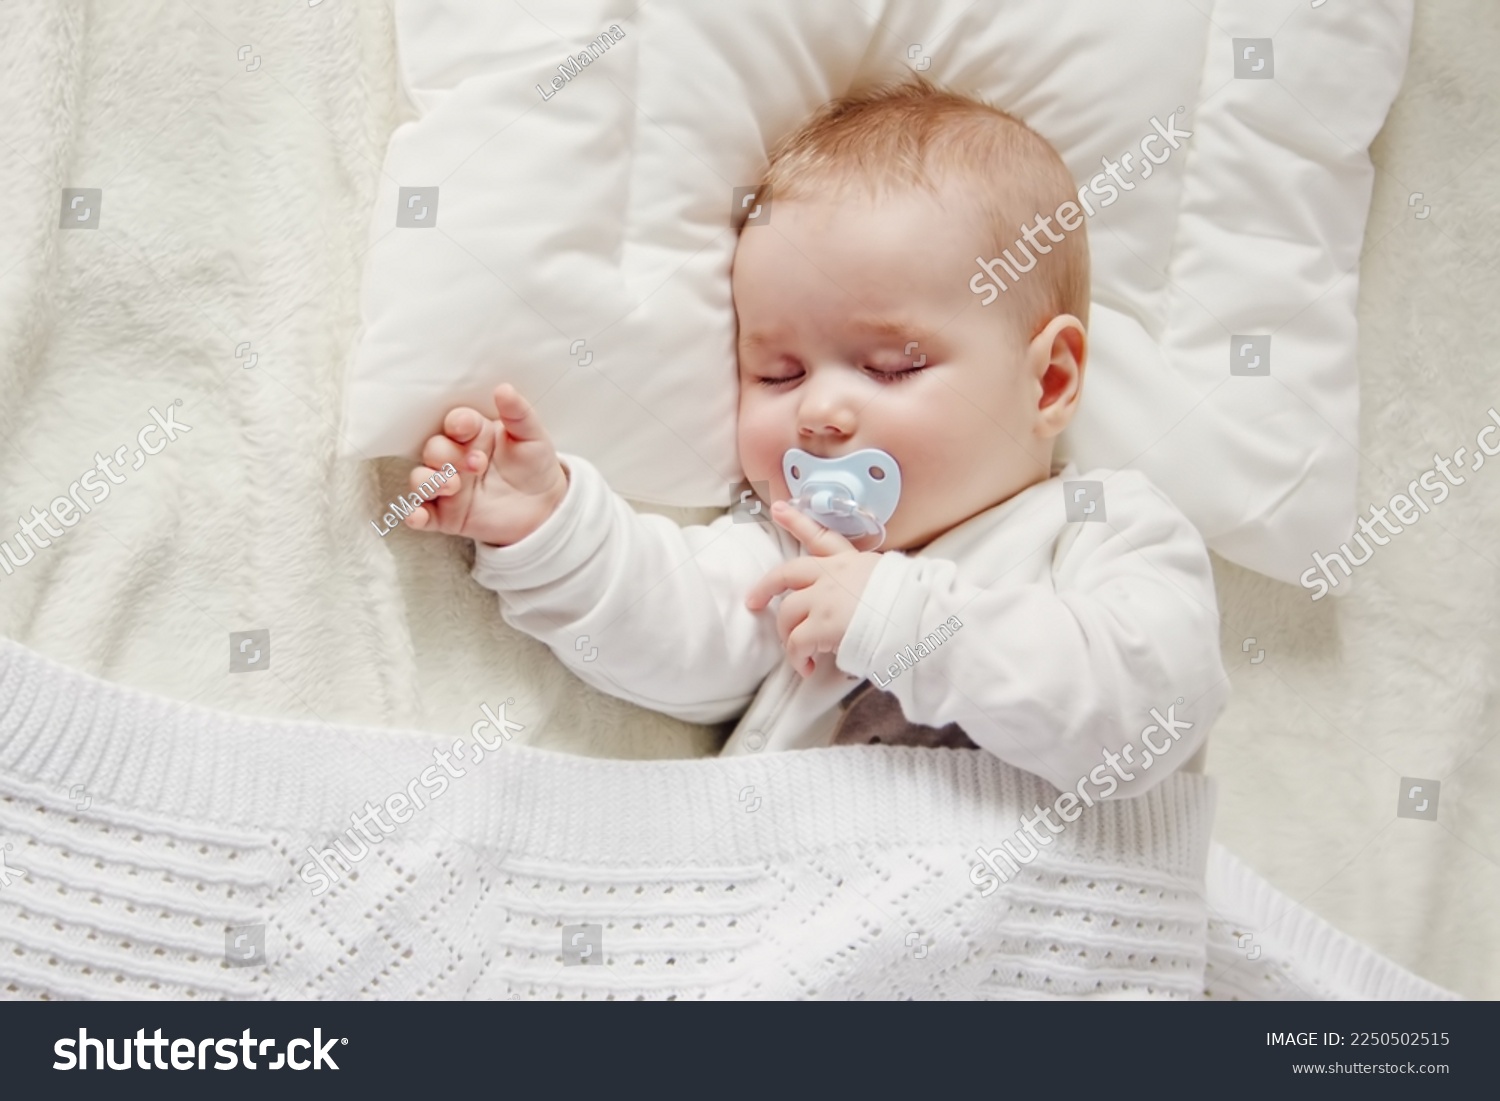 Cute five month old baby sleeping in comfortable bed. Concept of the family andparenting. #2250502515